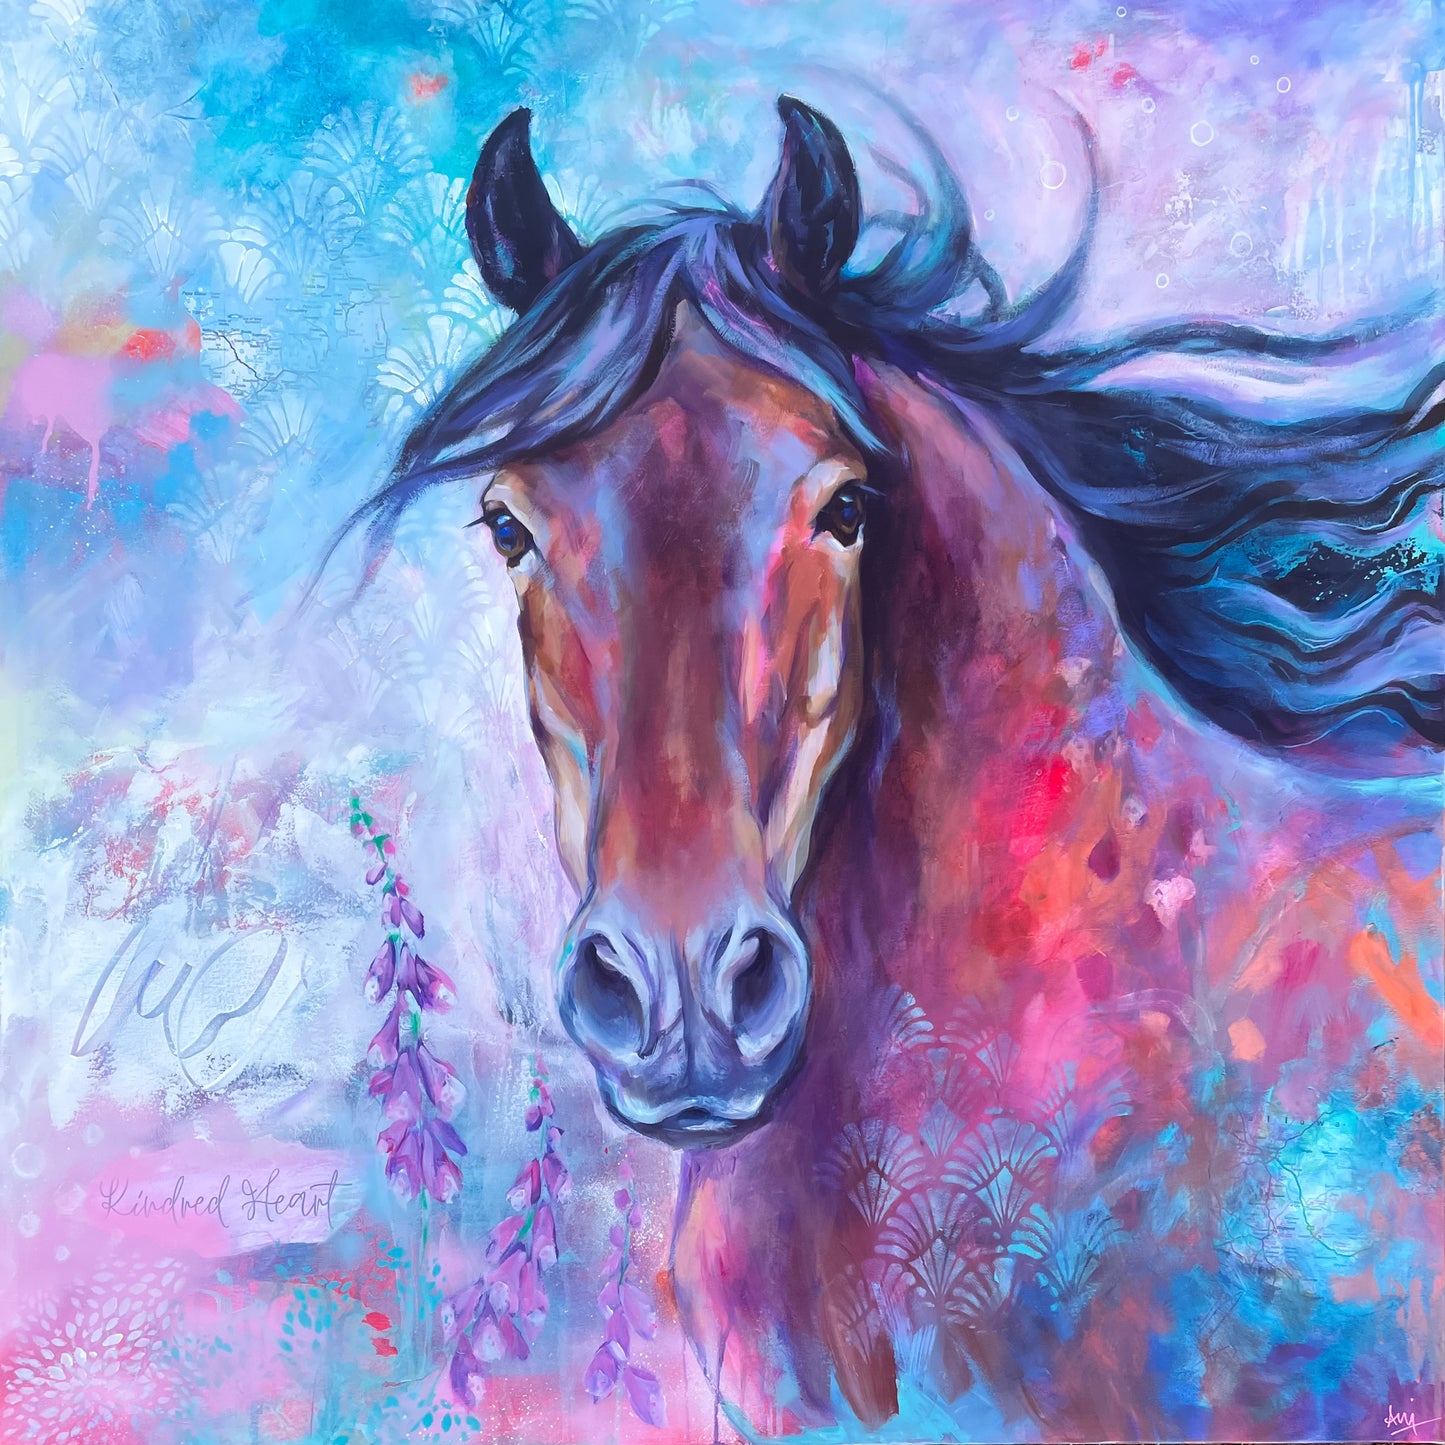 Kindred - Original Horse Painting